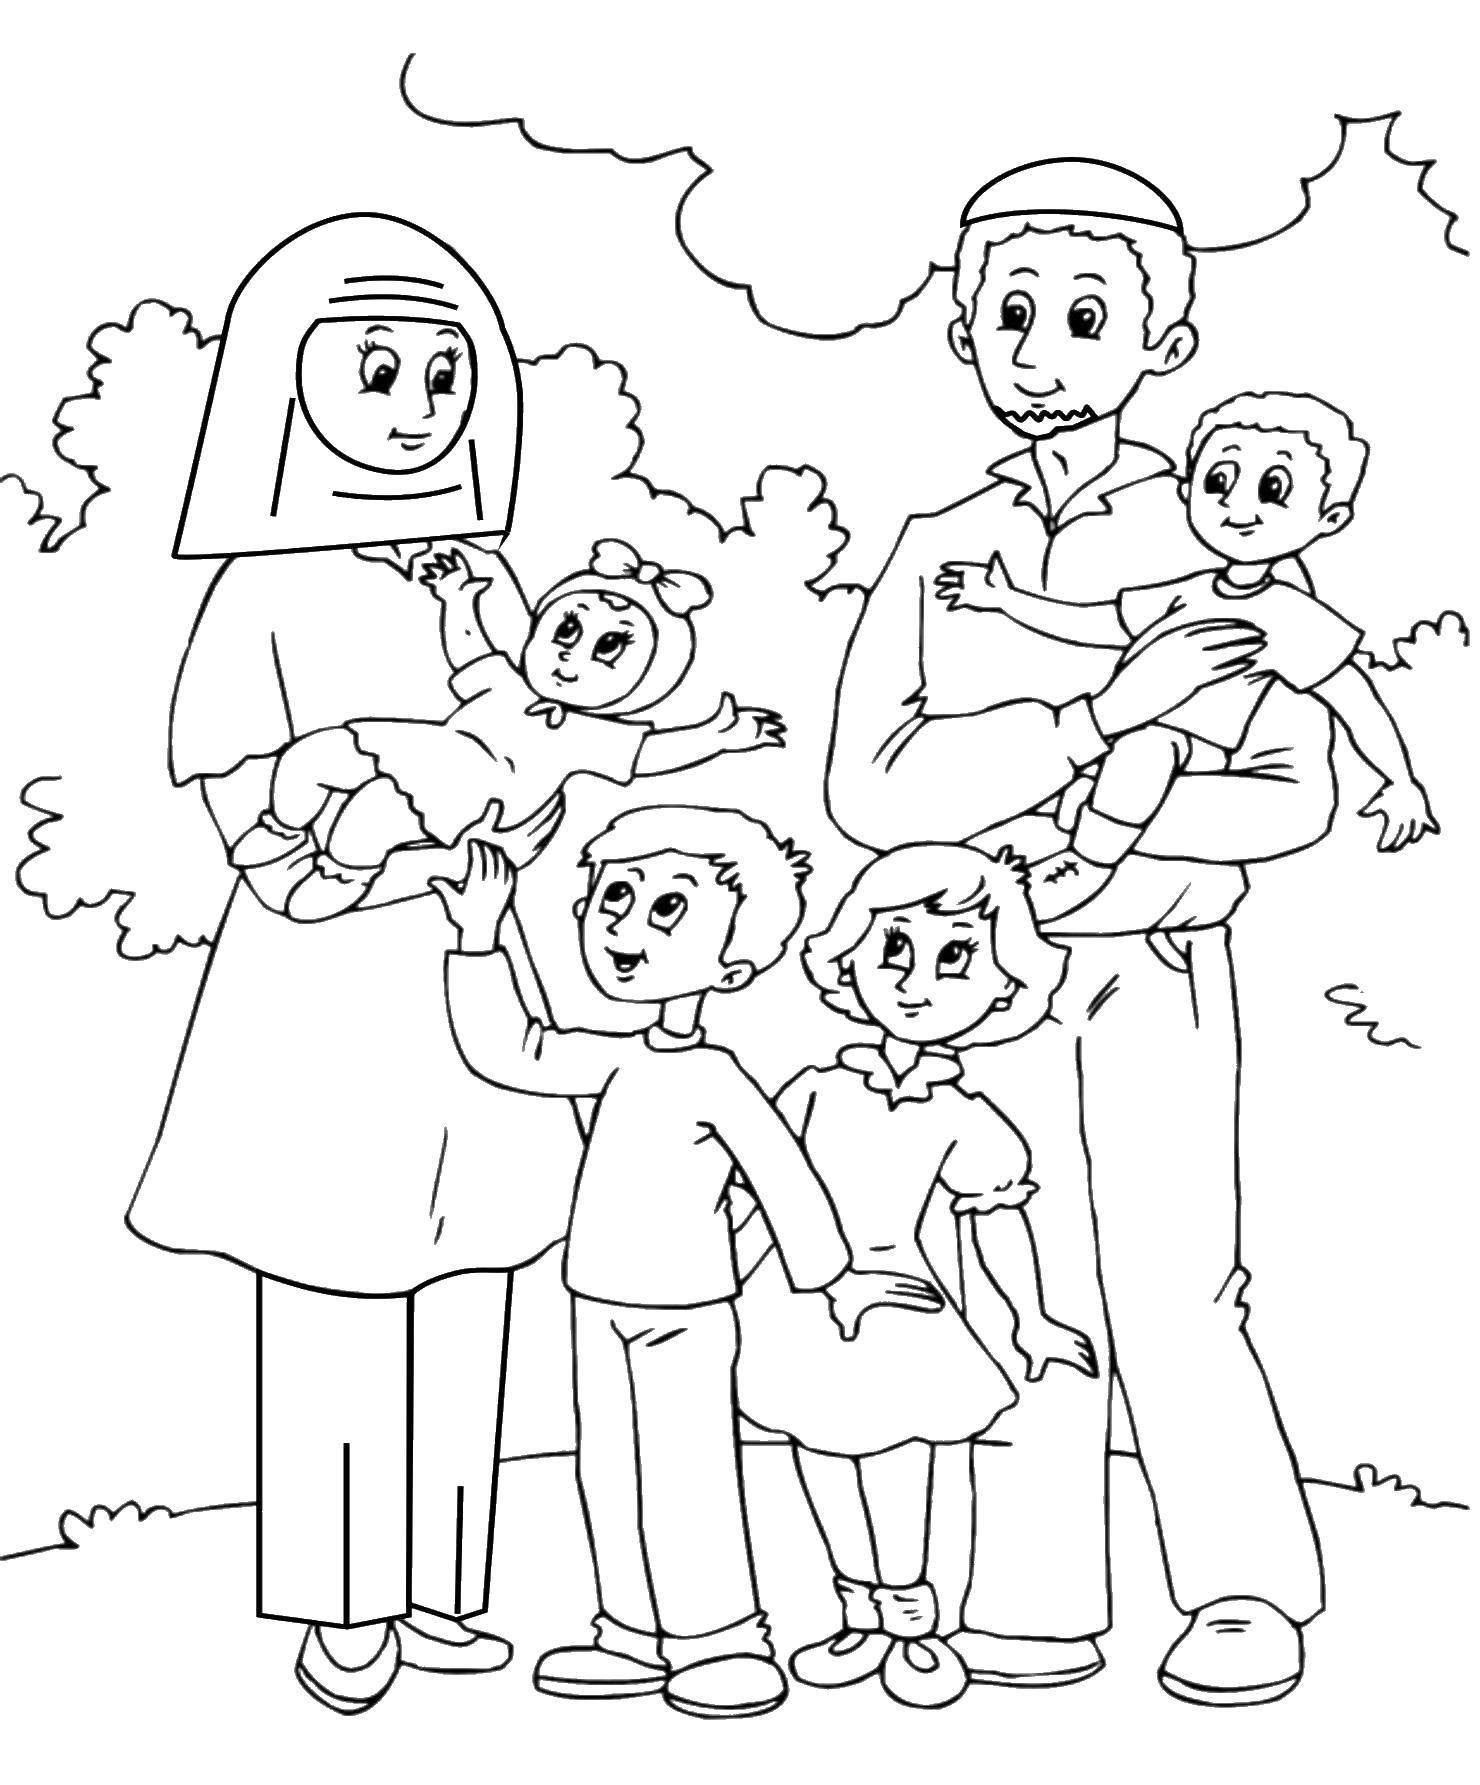 Coloring Big large family. Category Family members. Tags:  family, families, children.